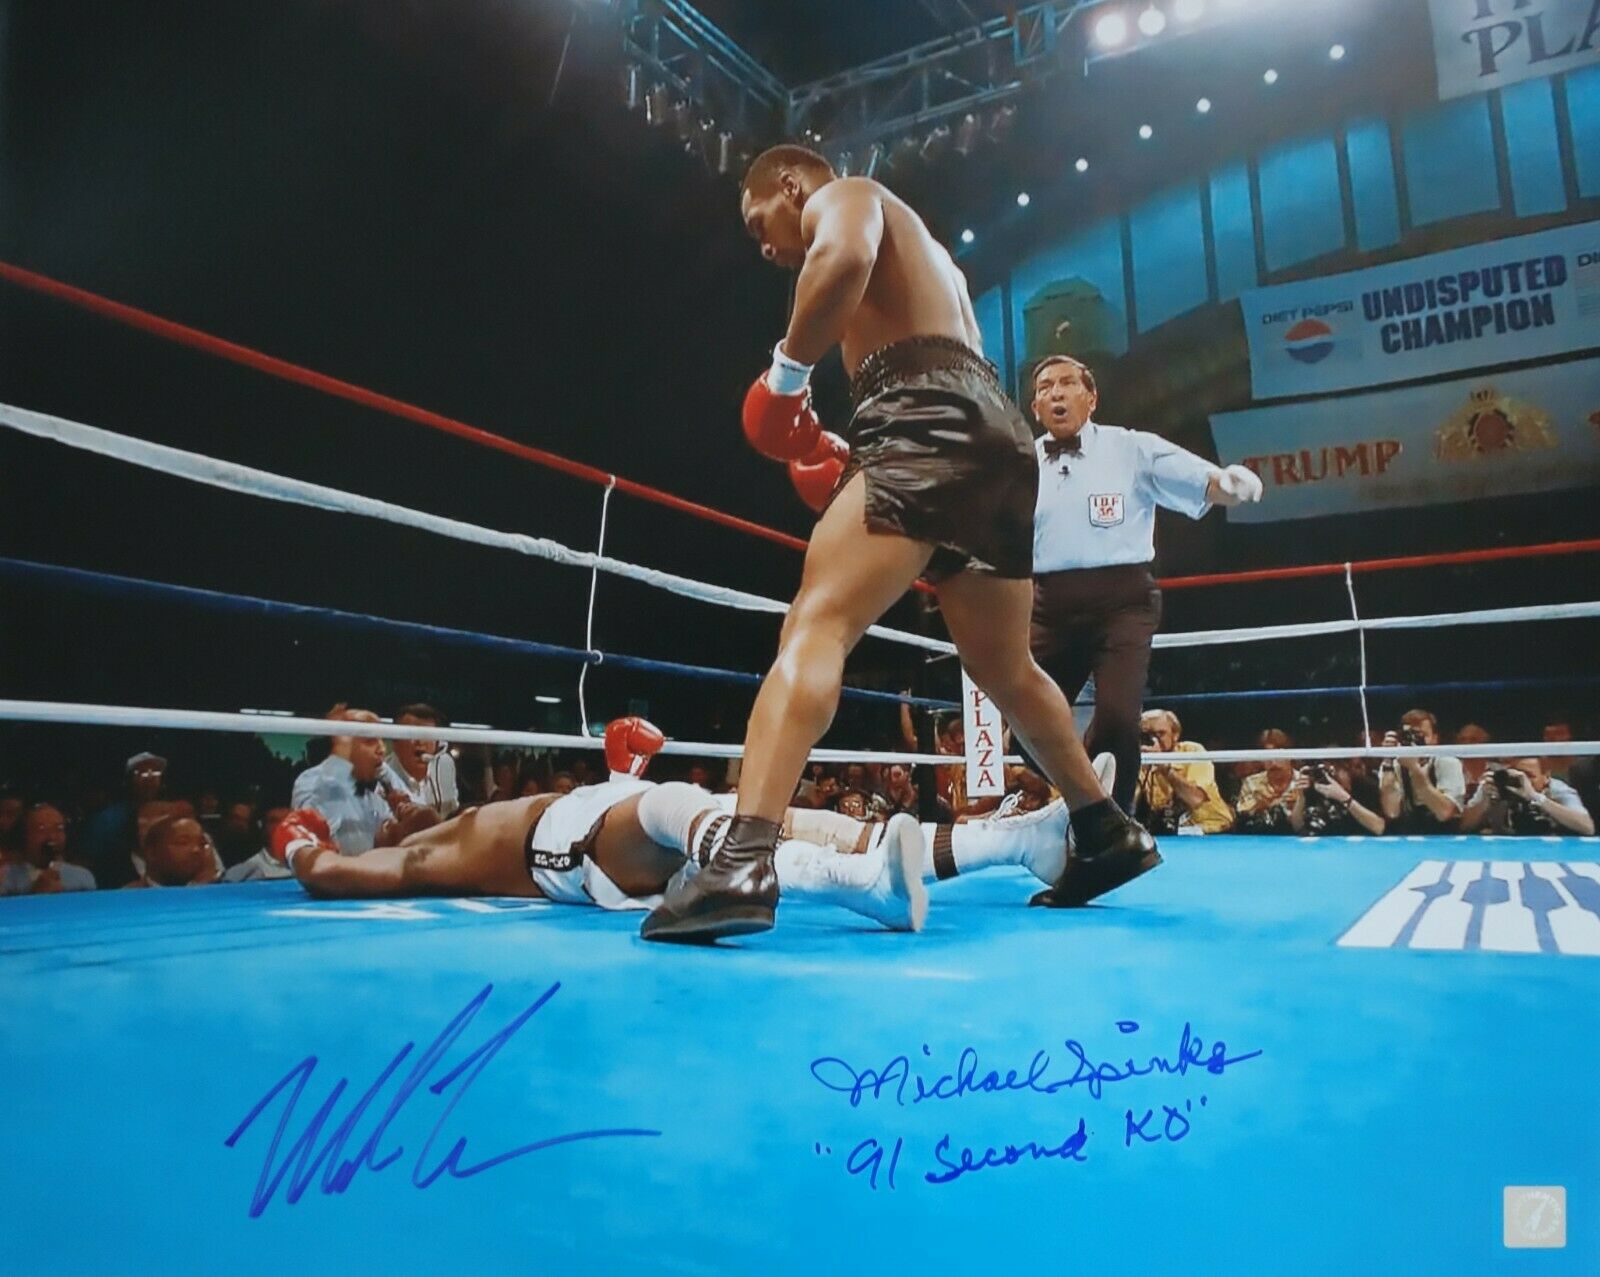 Mike Tyson & Michael Spinks "91 Second Ko" Autographed 16x20 Photo  Asi Proof